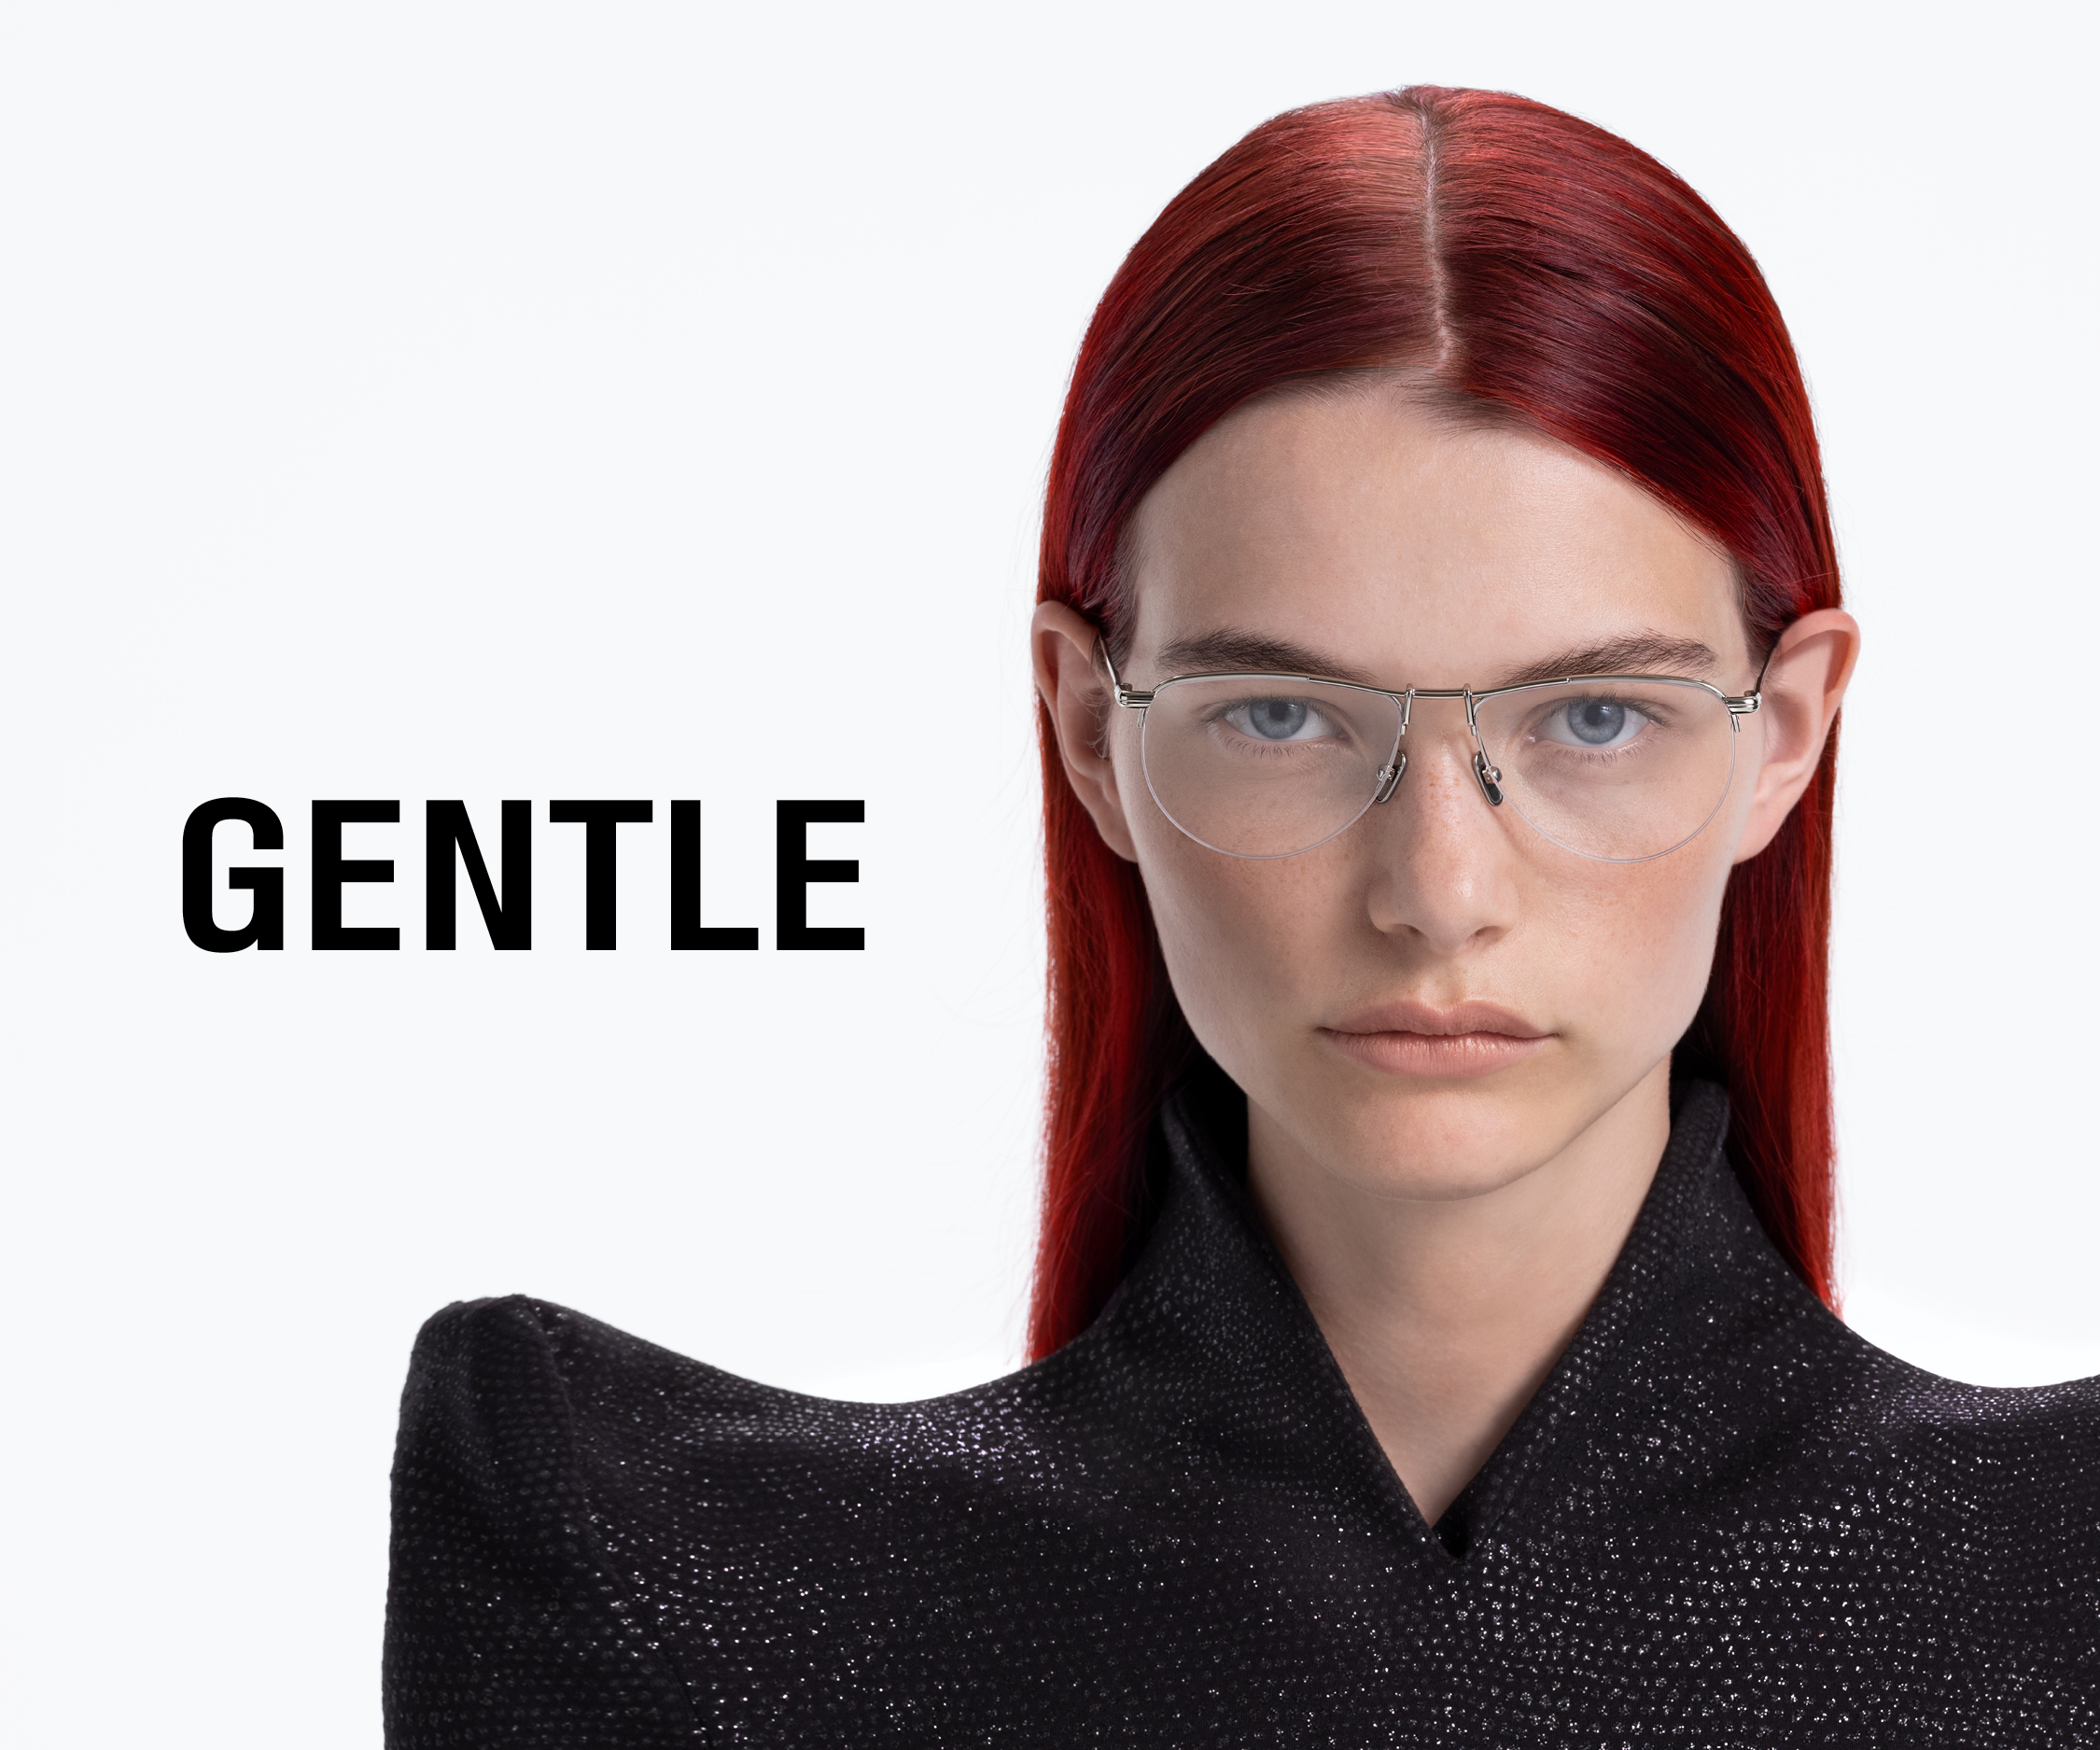 Gentle Monster's First Optical Collection and Campaign “GENTLE